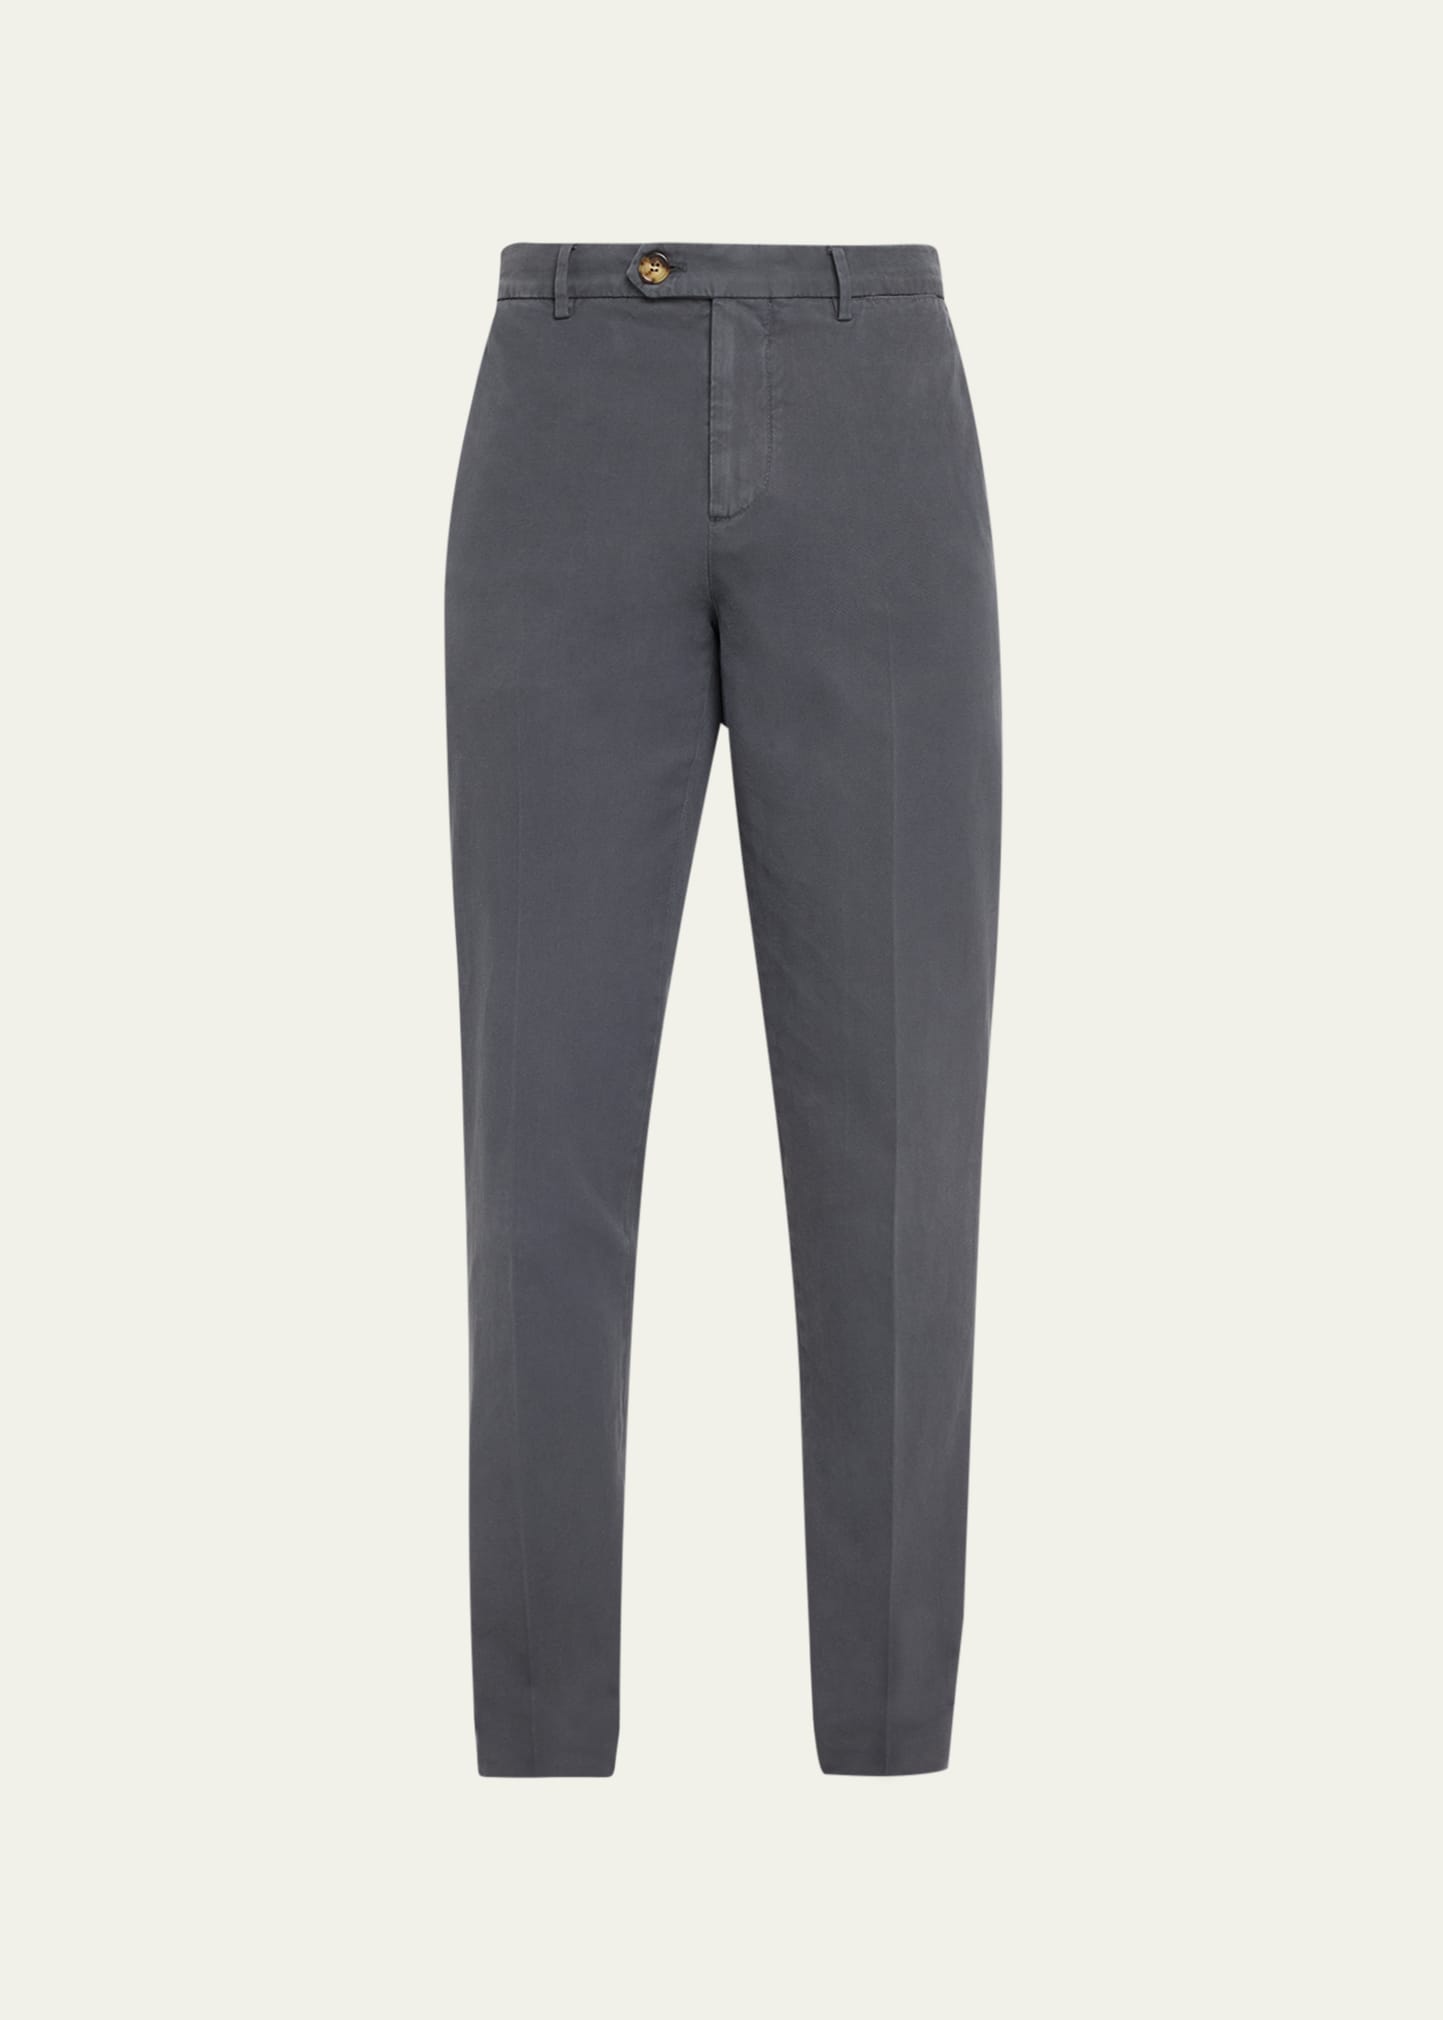 Brunello Cucinelli Men's Dyed Flat-front Pants In C6313 Grey